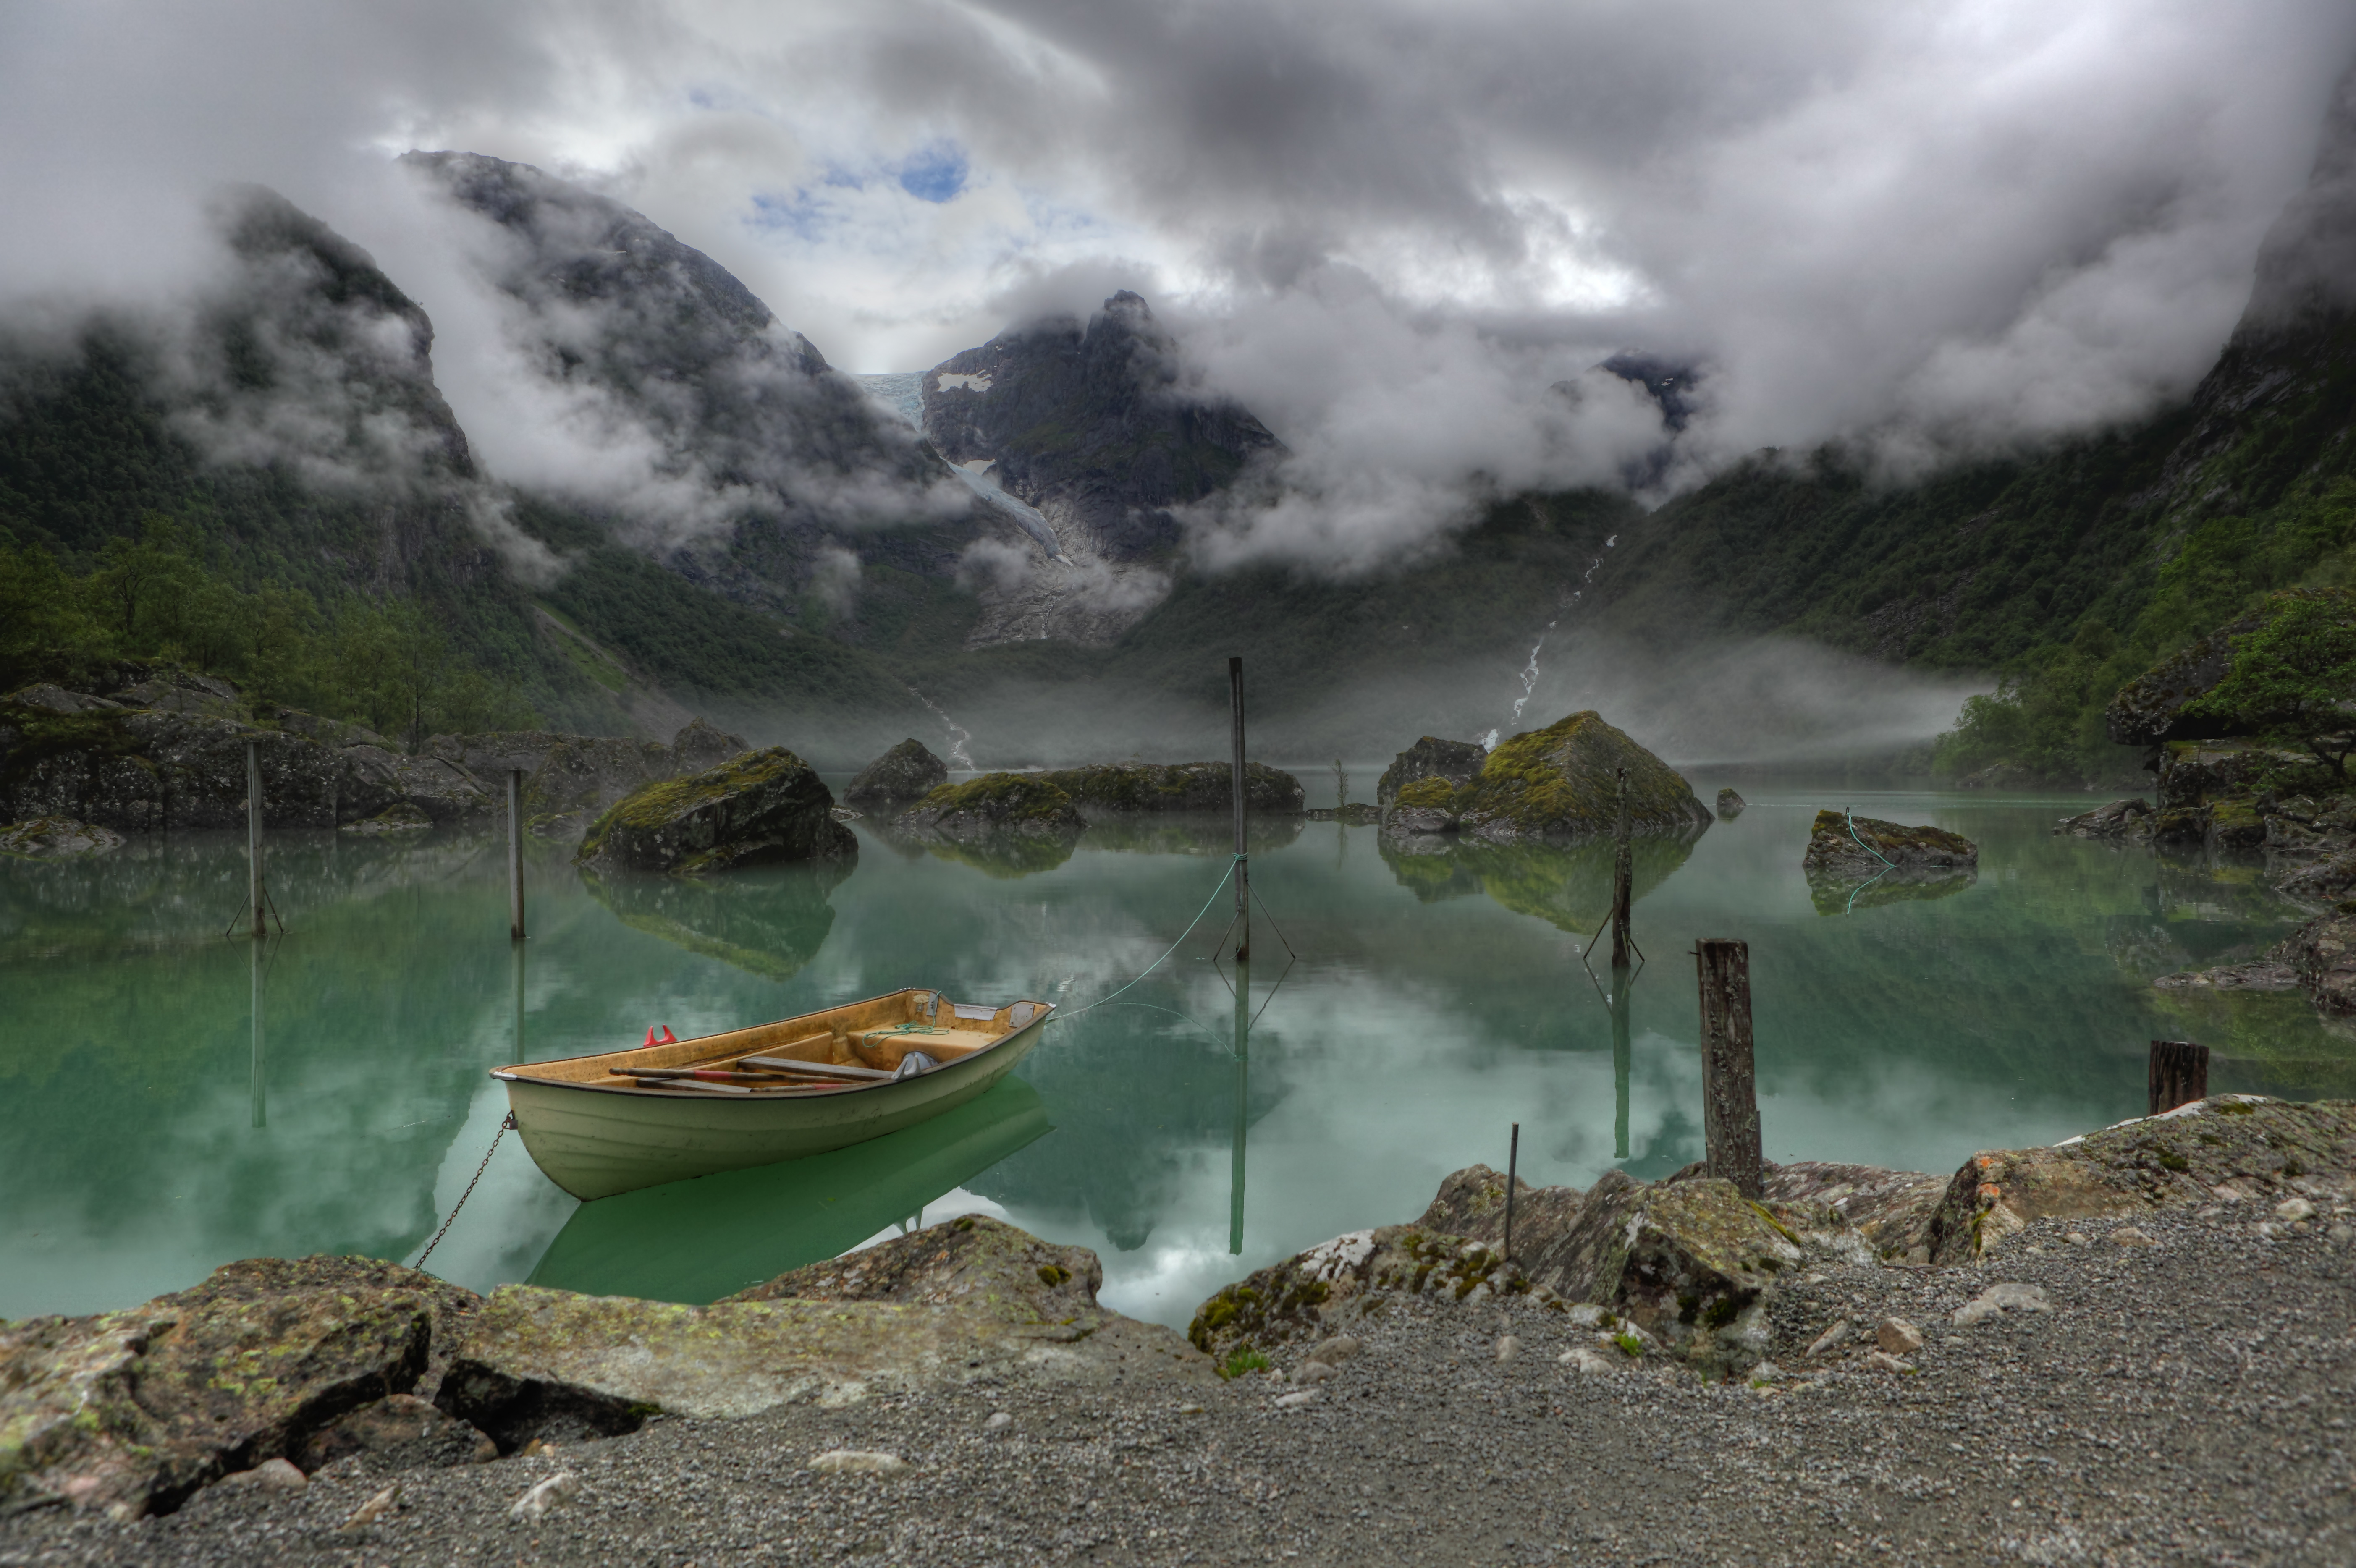 A view of Lake Bondhus and Bondhus glacier in Norway, Folgefonna National Park by Alchemist-hp